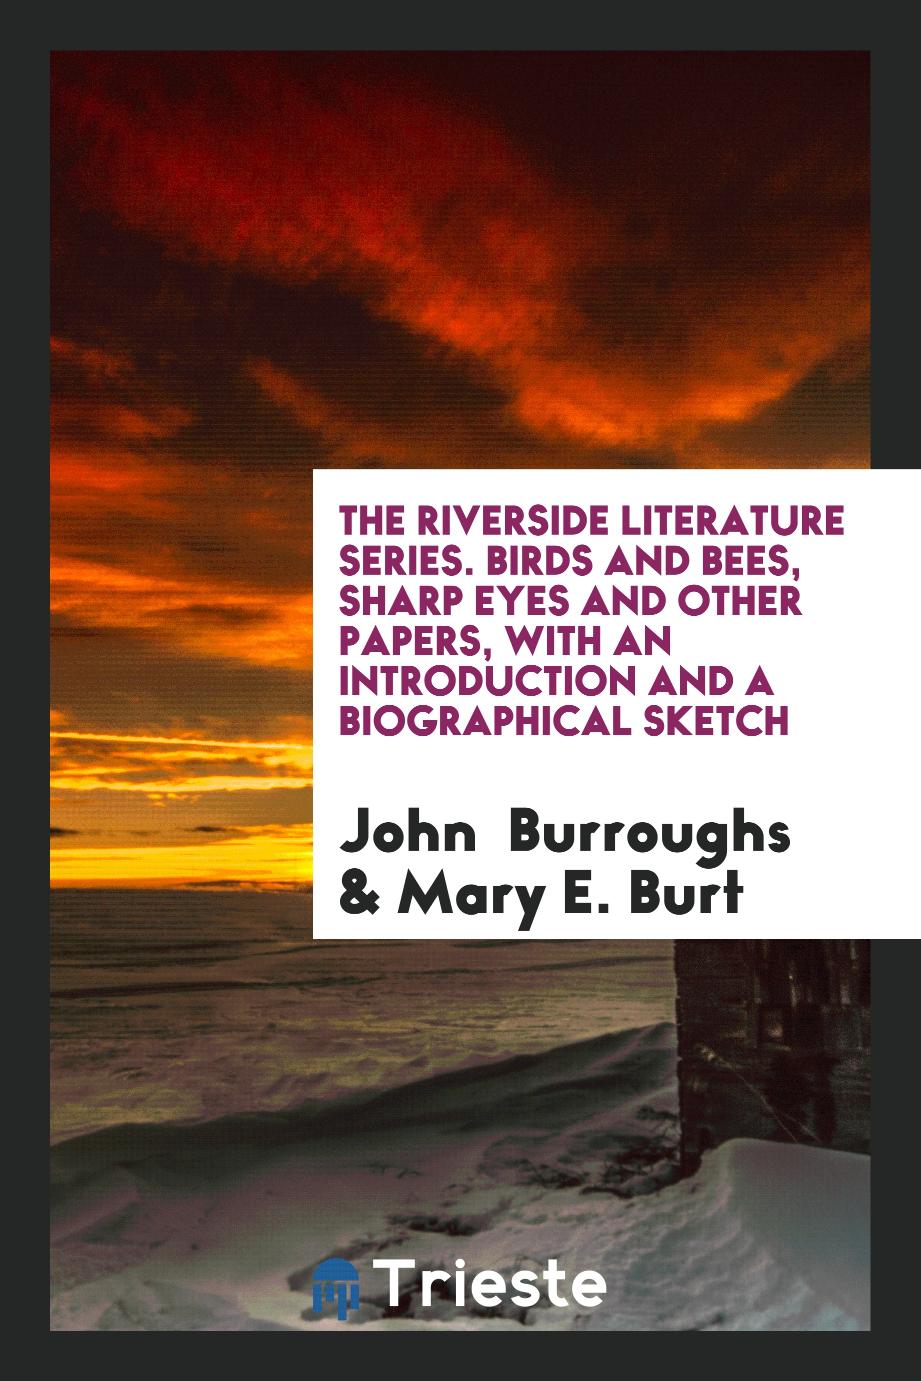 The Riverside Literature Series. Birds and Bees, Sharp Eyes and Other Papers, with an Introduction and a Biographical Sketch